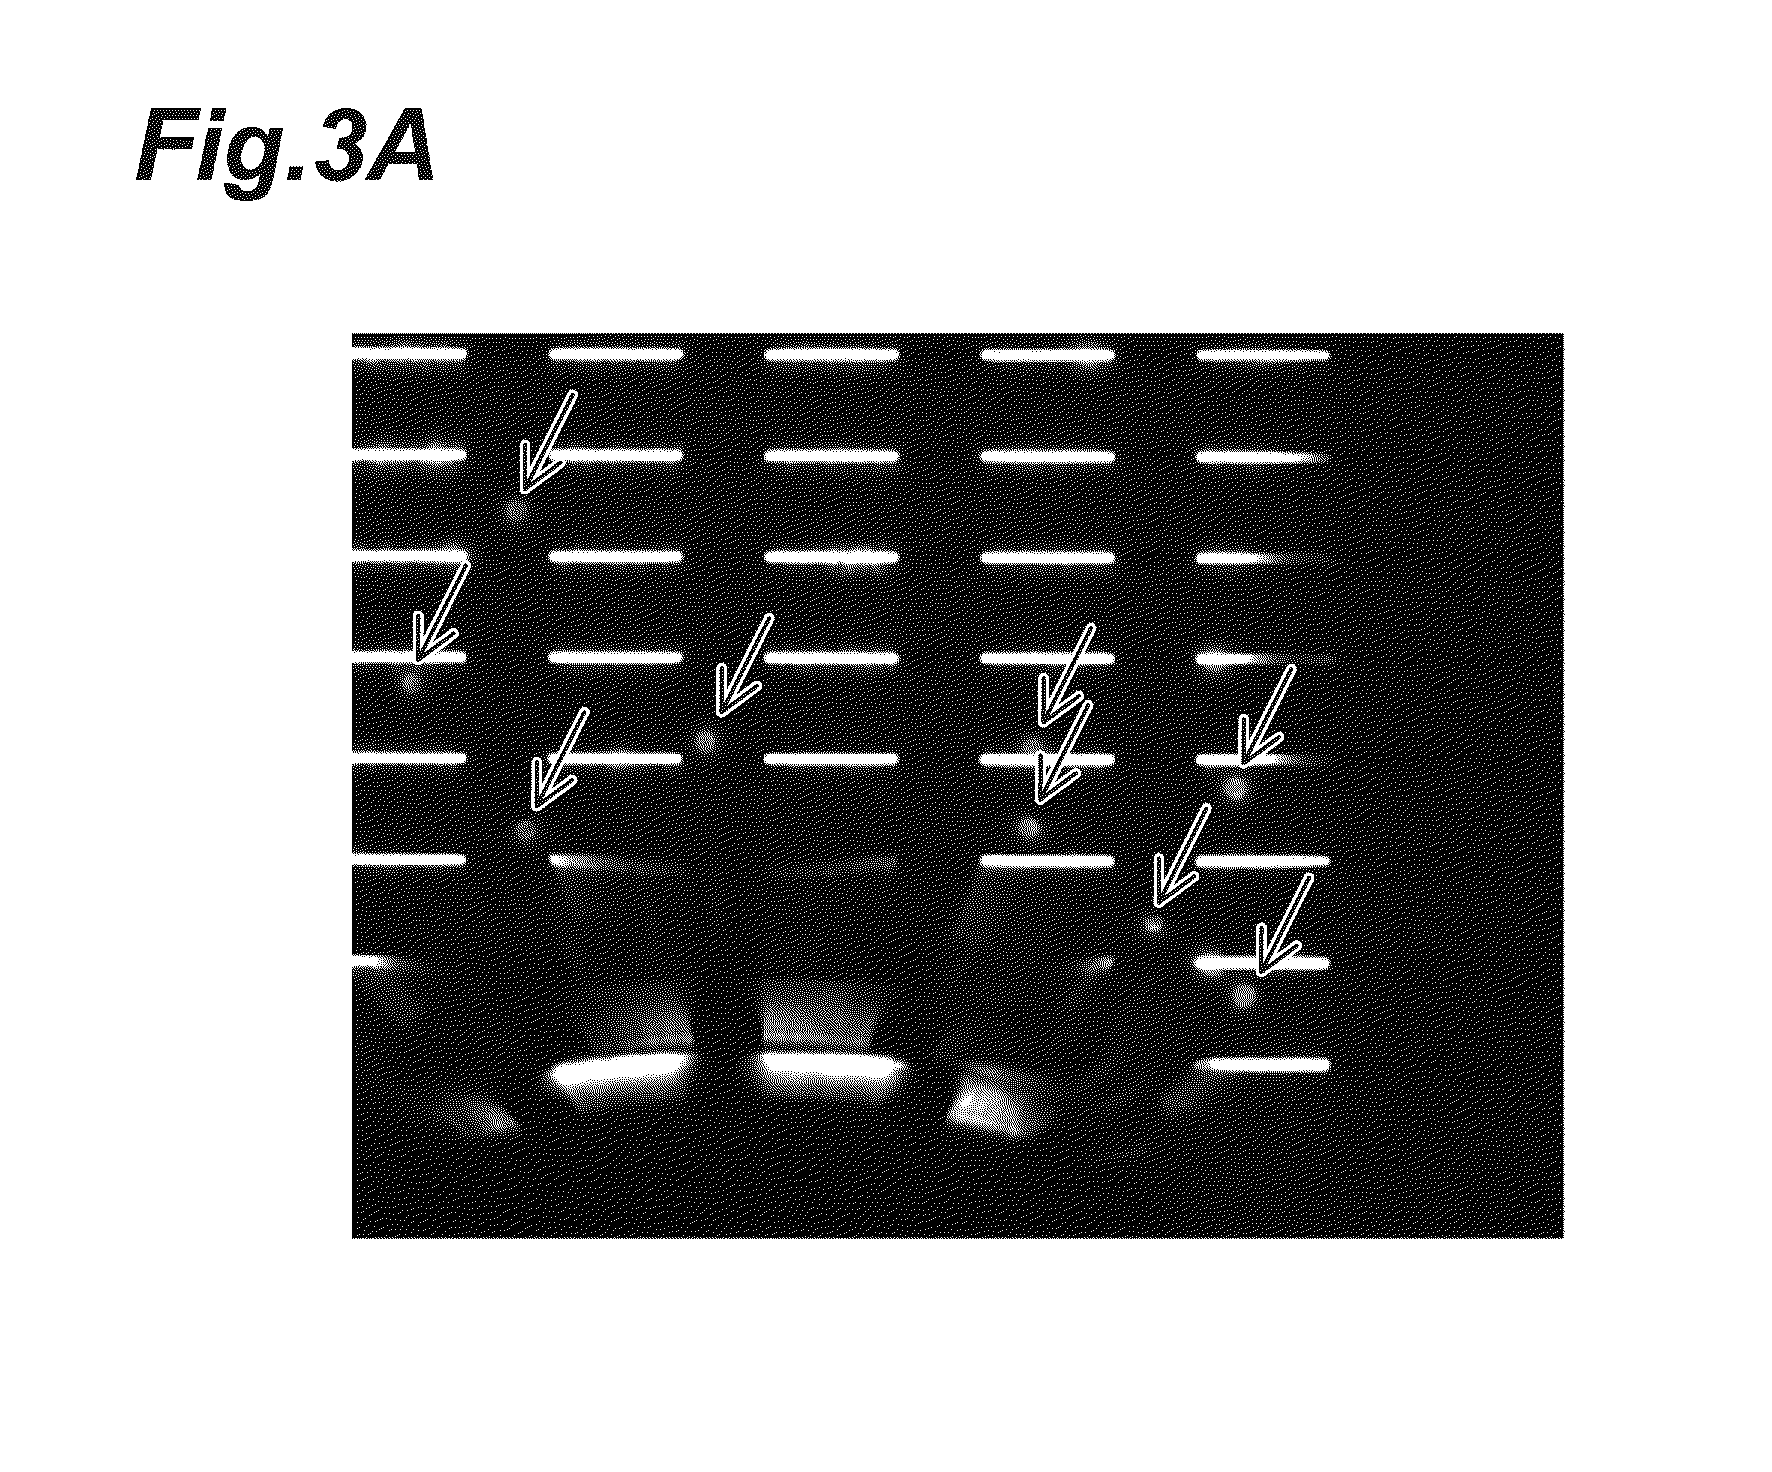 Method of collecting of rare cells from the enclosed filters system